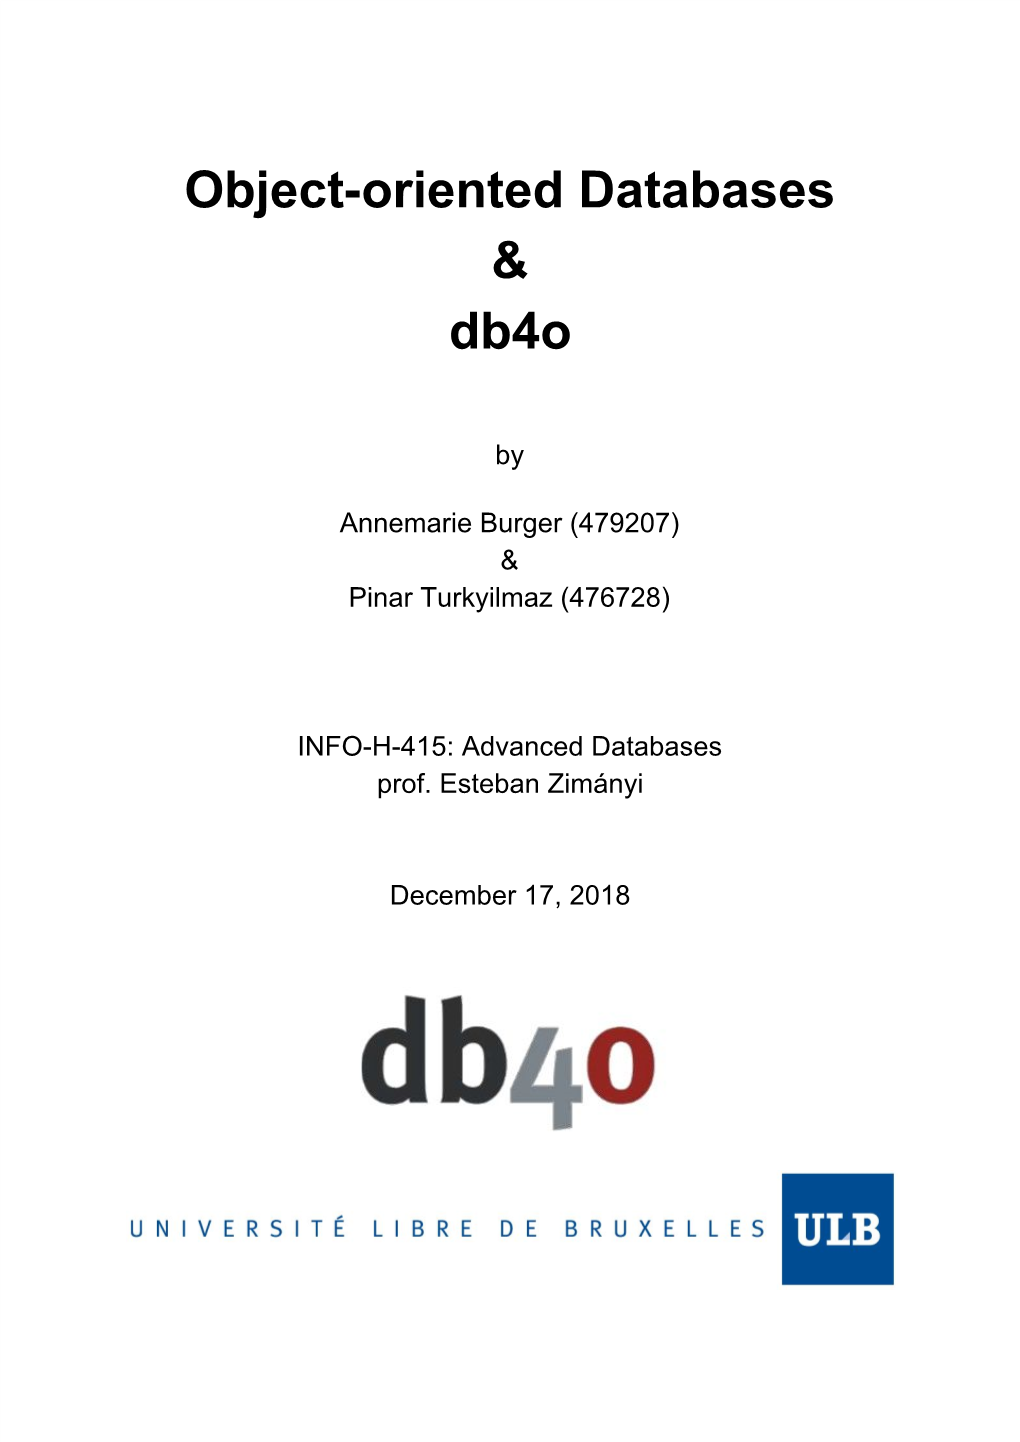 Object-Oriented Databases & Db4o